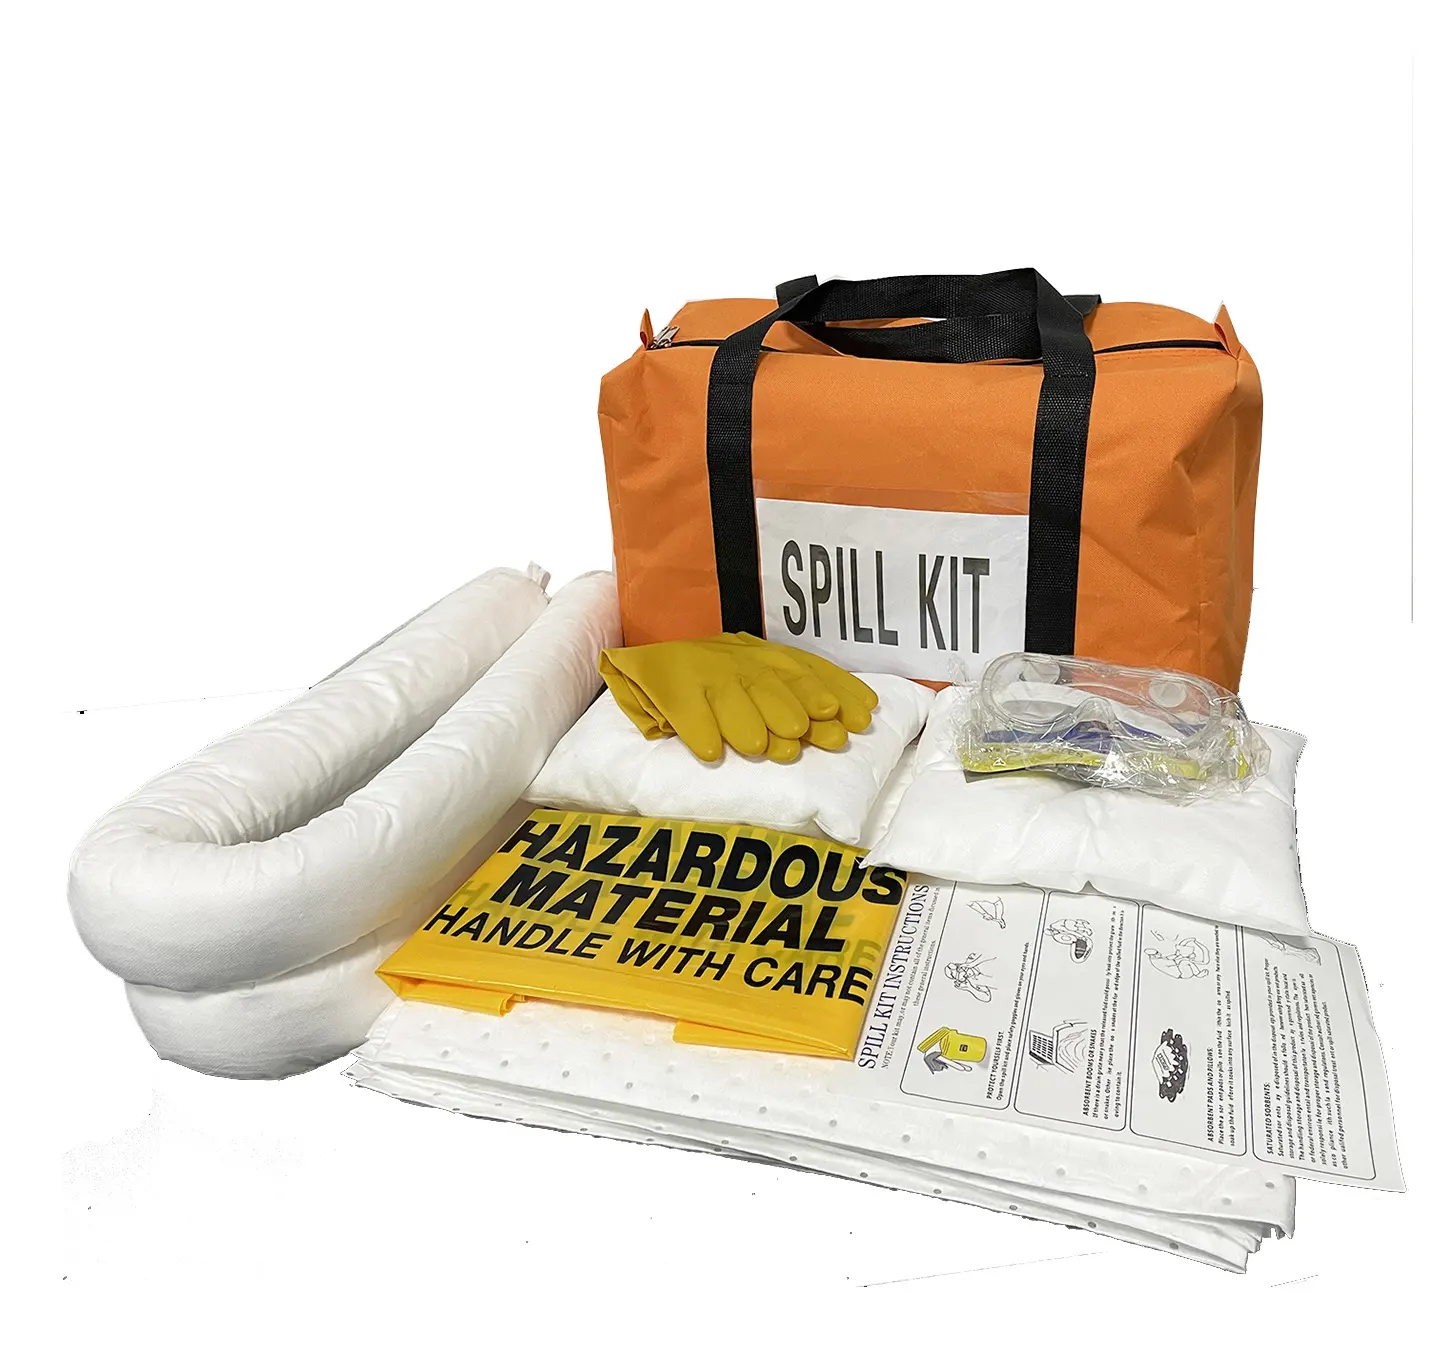 JUNENG China factory direct sale efficient universal Spill Kit for emergency spill response kits